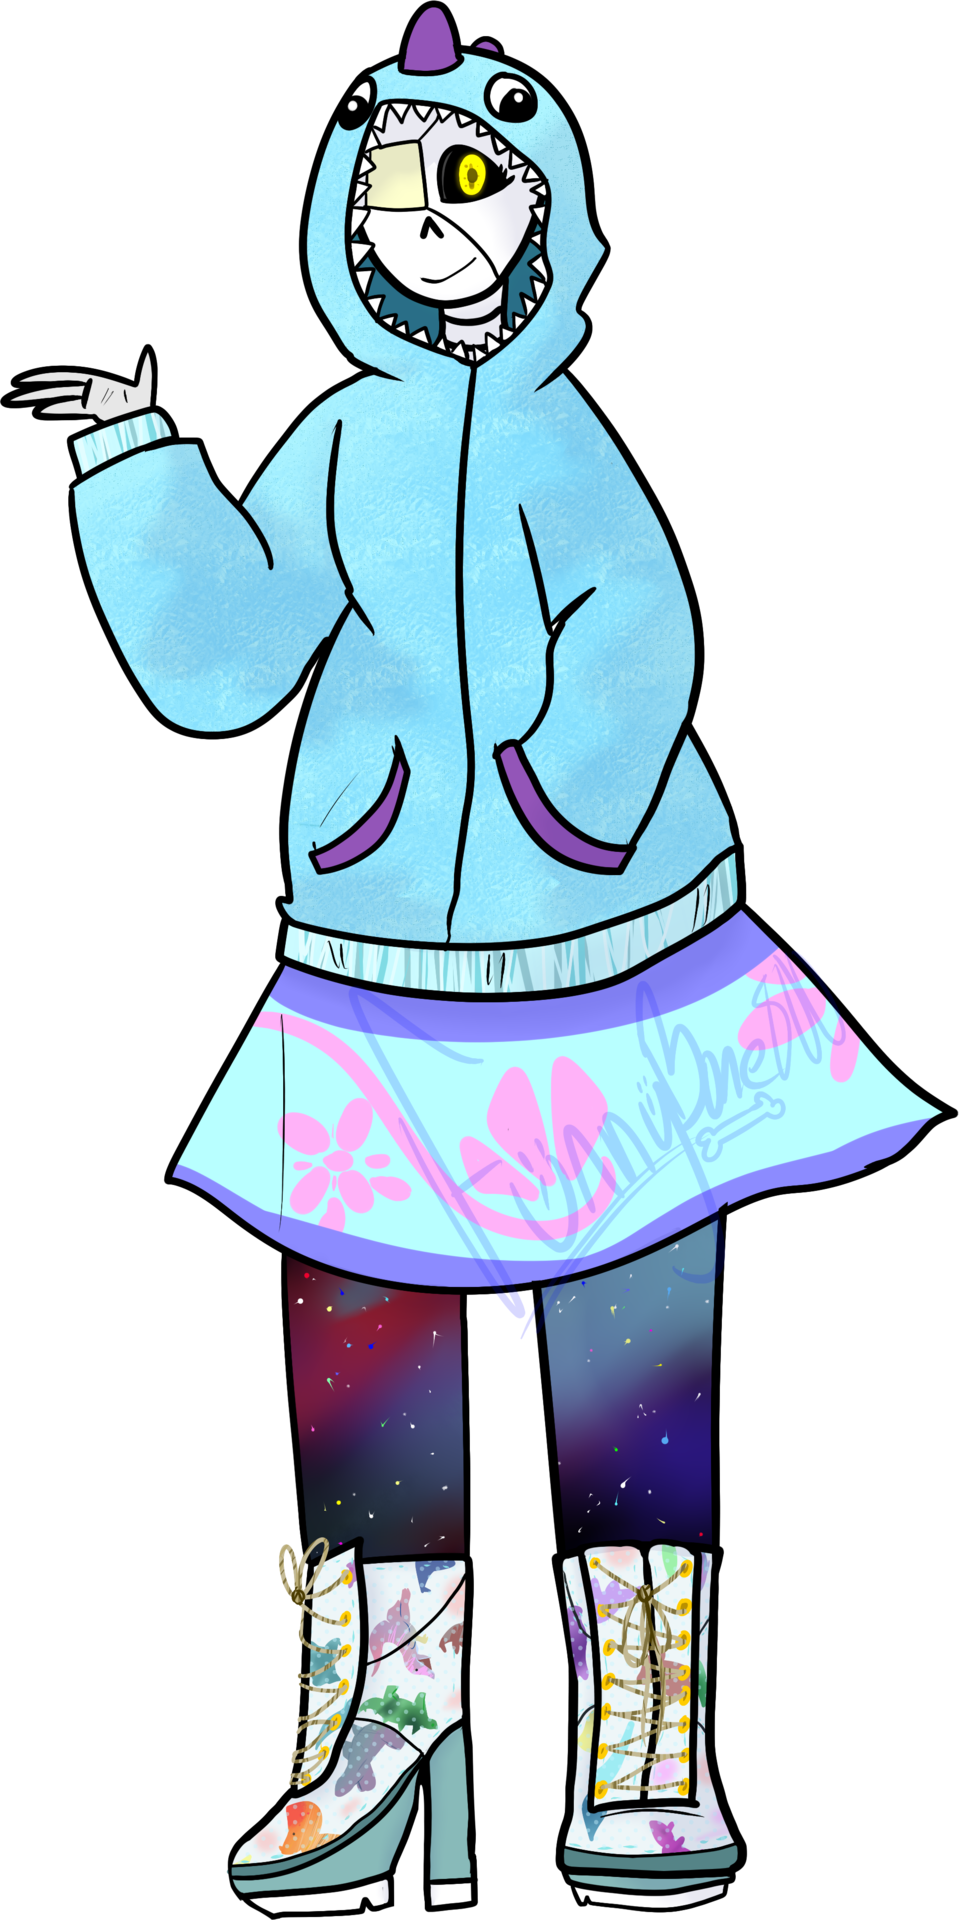 Villith Wanted Me To Draw Parsley In A Gay Ass Outfit - Villith Wanted Me To Draw Parsley In A Gay Ass Outfit (959x1920)